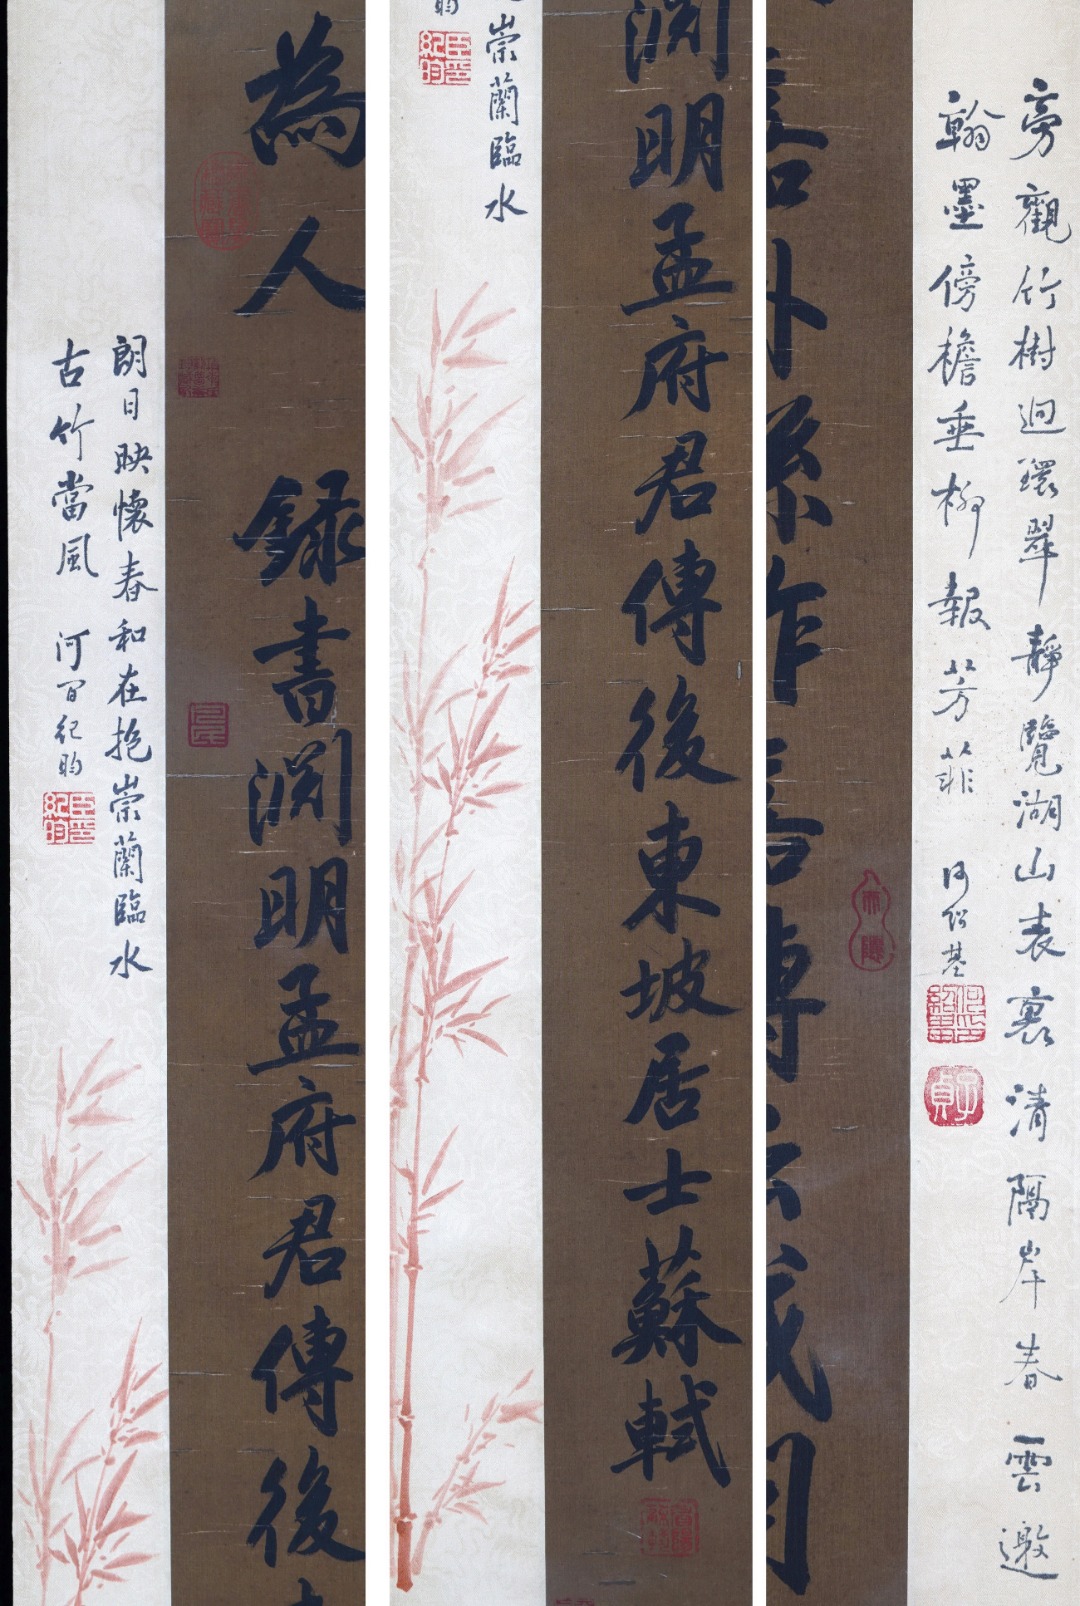 A Chinese Scroll Calligraphy By Su Shi - Image 8 of 13